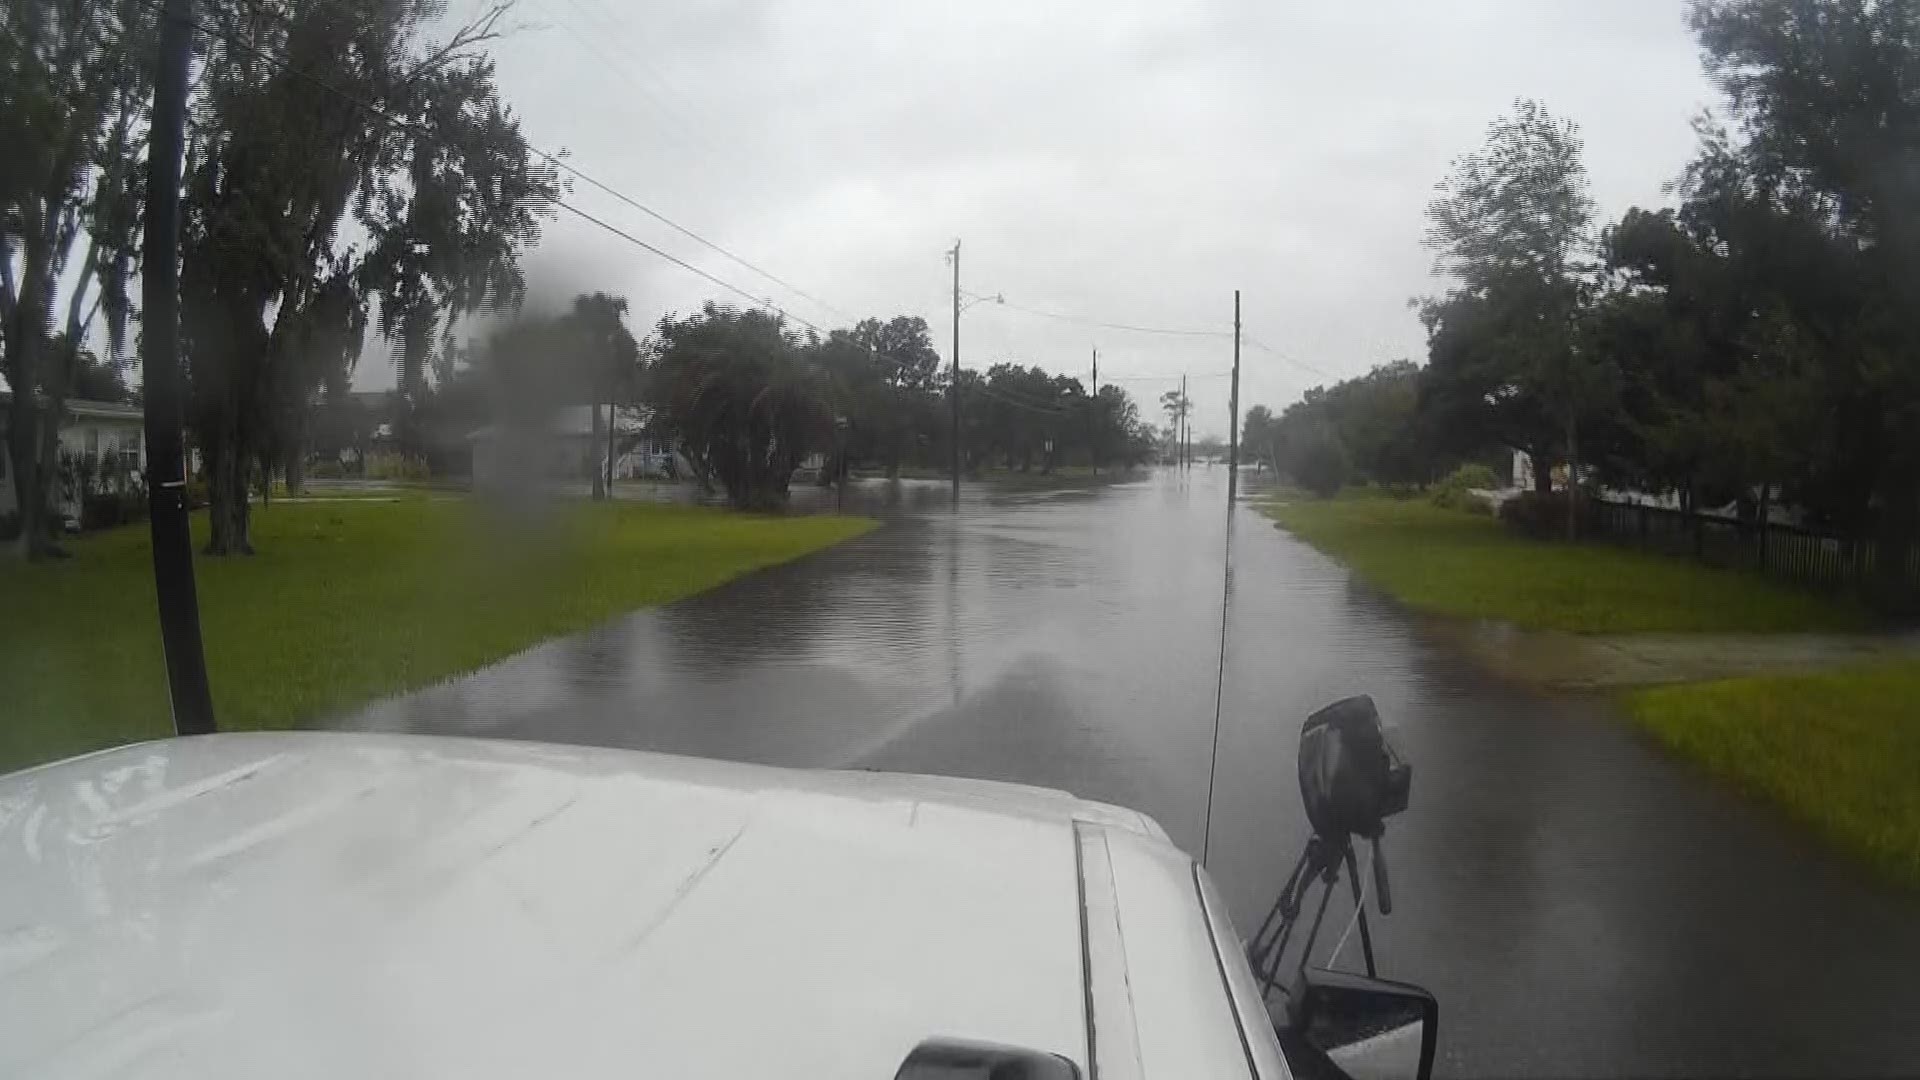 A First Coast News crew was on the scene in Davis Shores when flood water caused by Hurricane Dorian started covering the roads.